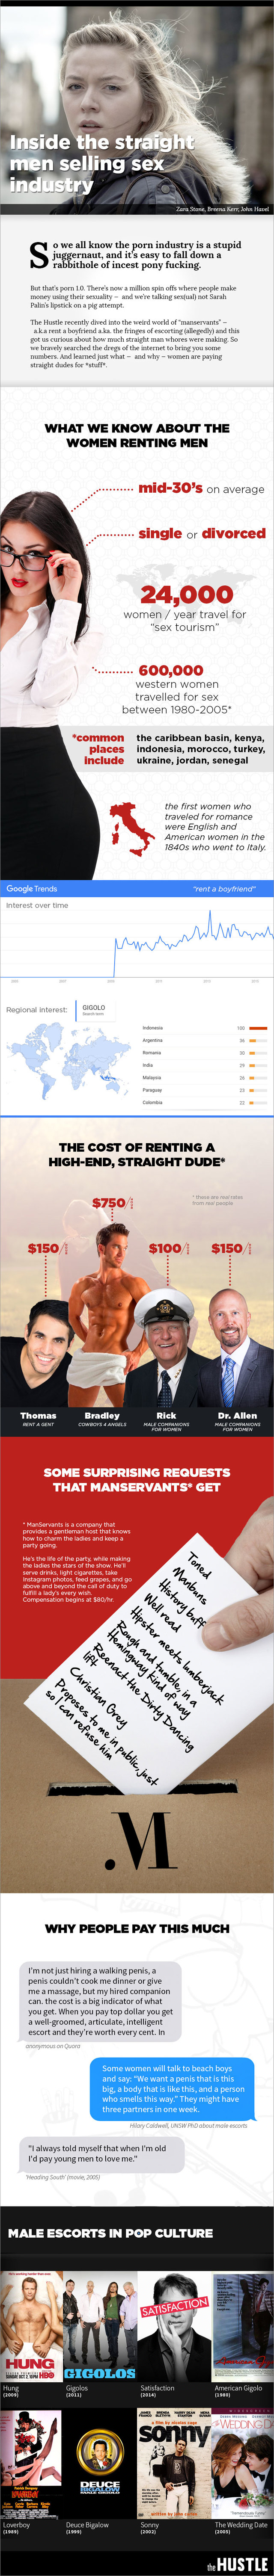 straight men photos men inside straight assets industry selling sexinfographic